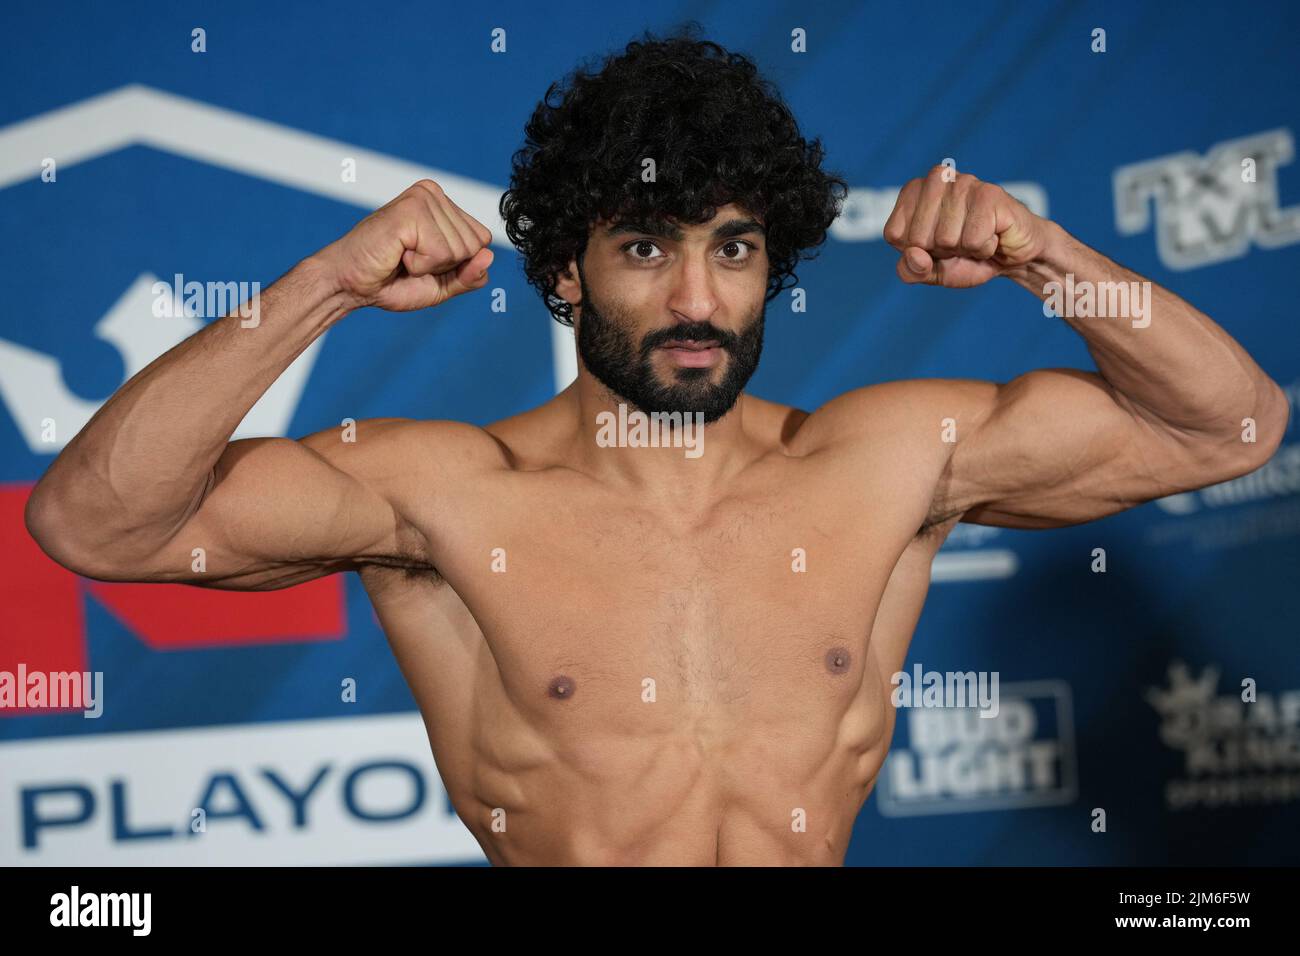 NEW YORK CITY, NY - August 4: Mahmoud Sebie steps on the scale for the official weigh-ins at The New Yorker Hotel for 2022 PFL Playoffs Semi-Finals : Official Weigh-ins on August 4, 2022 in New York City, NY, United States. (Photo by Louis Grasse/PxImages) Stock Photo